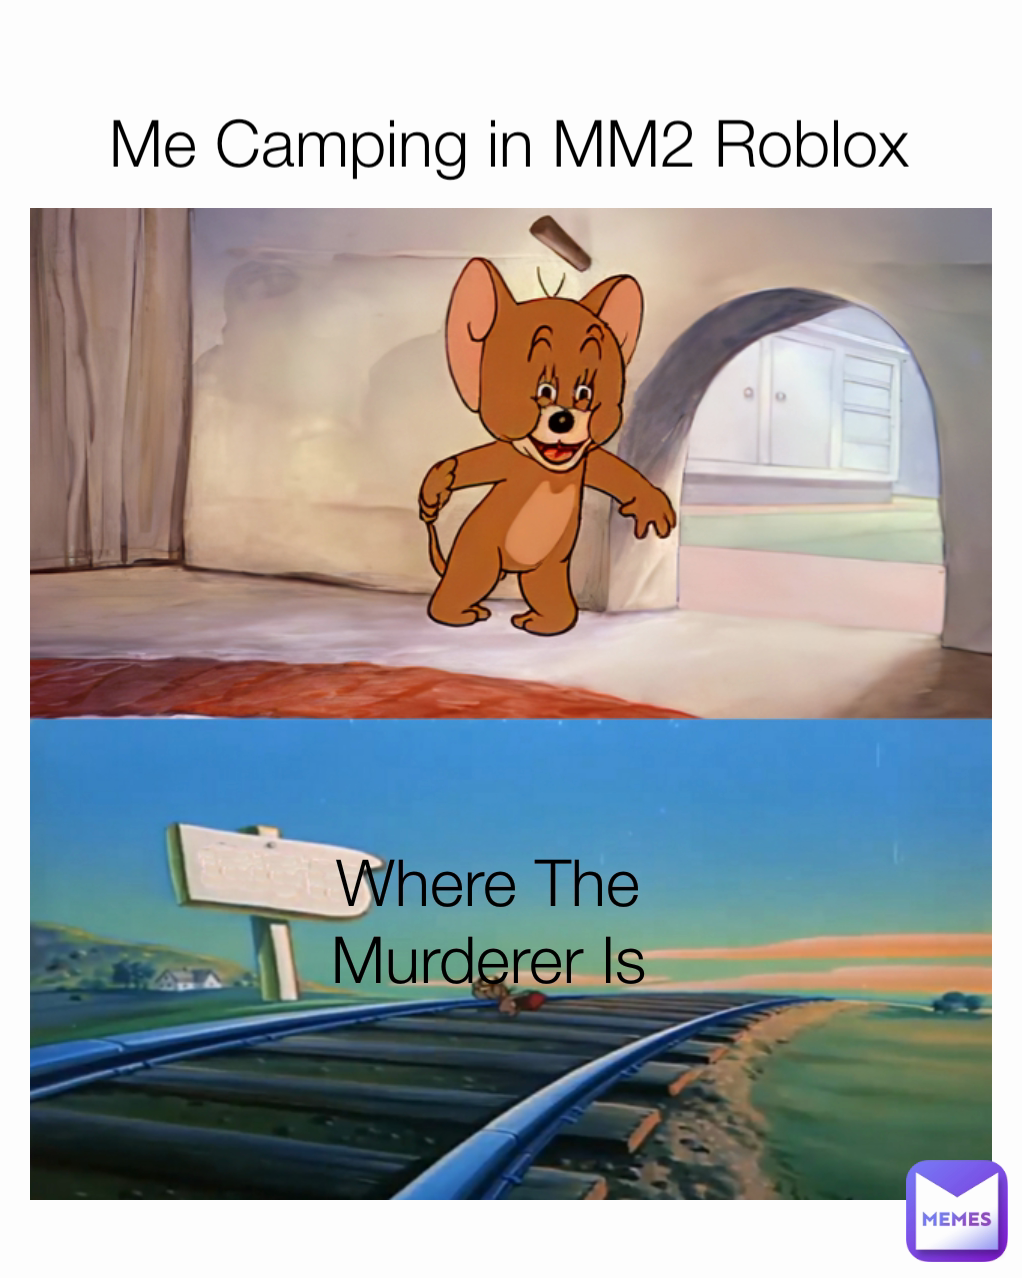 Where The Murderer Is Me Camping in MM2 Roblox